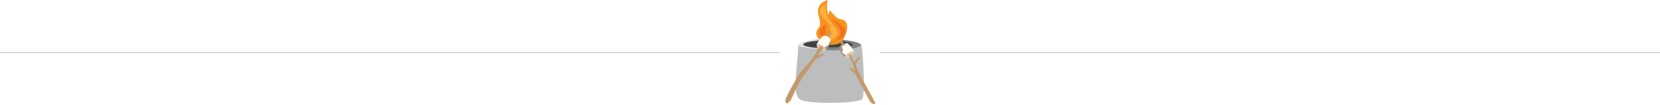 Illustration of a fire pit with marshmallows on sticks.